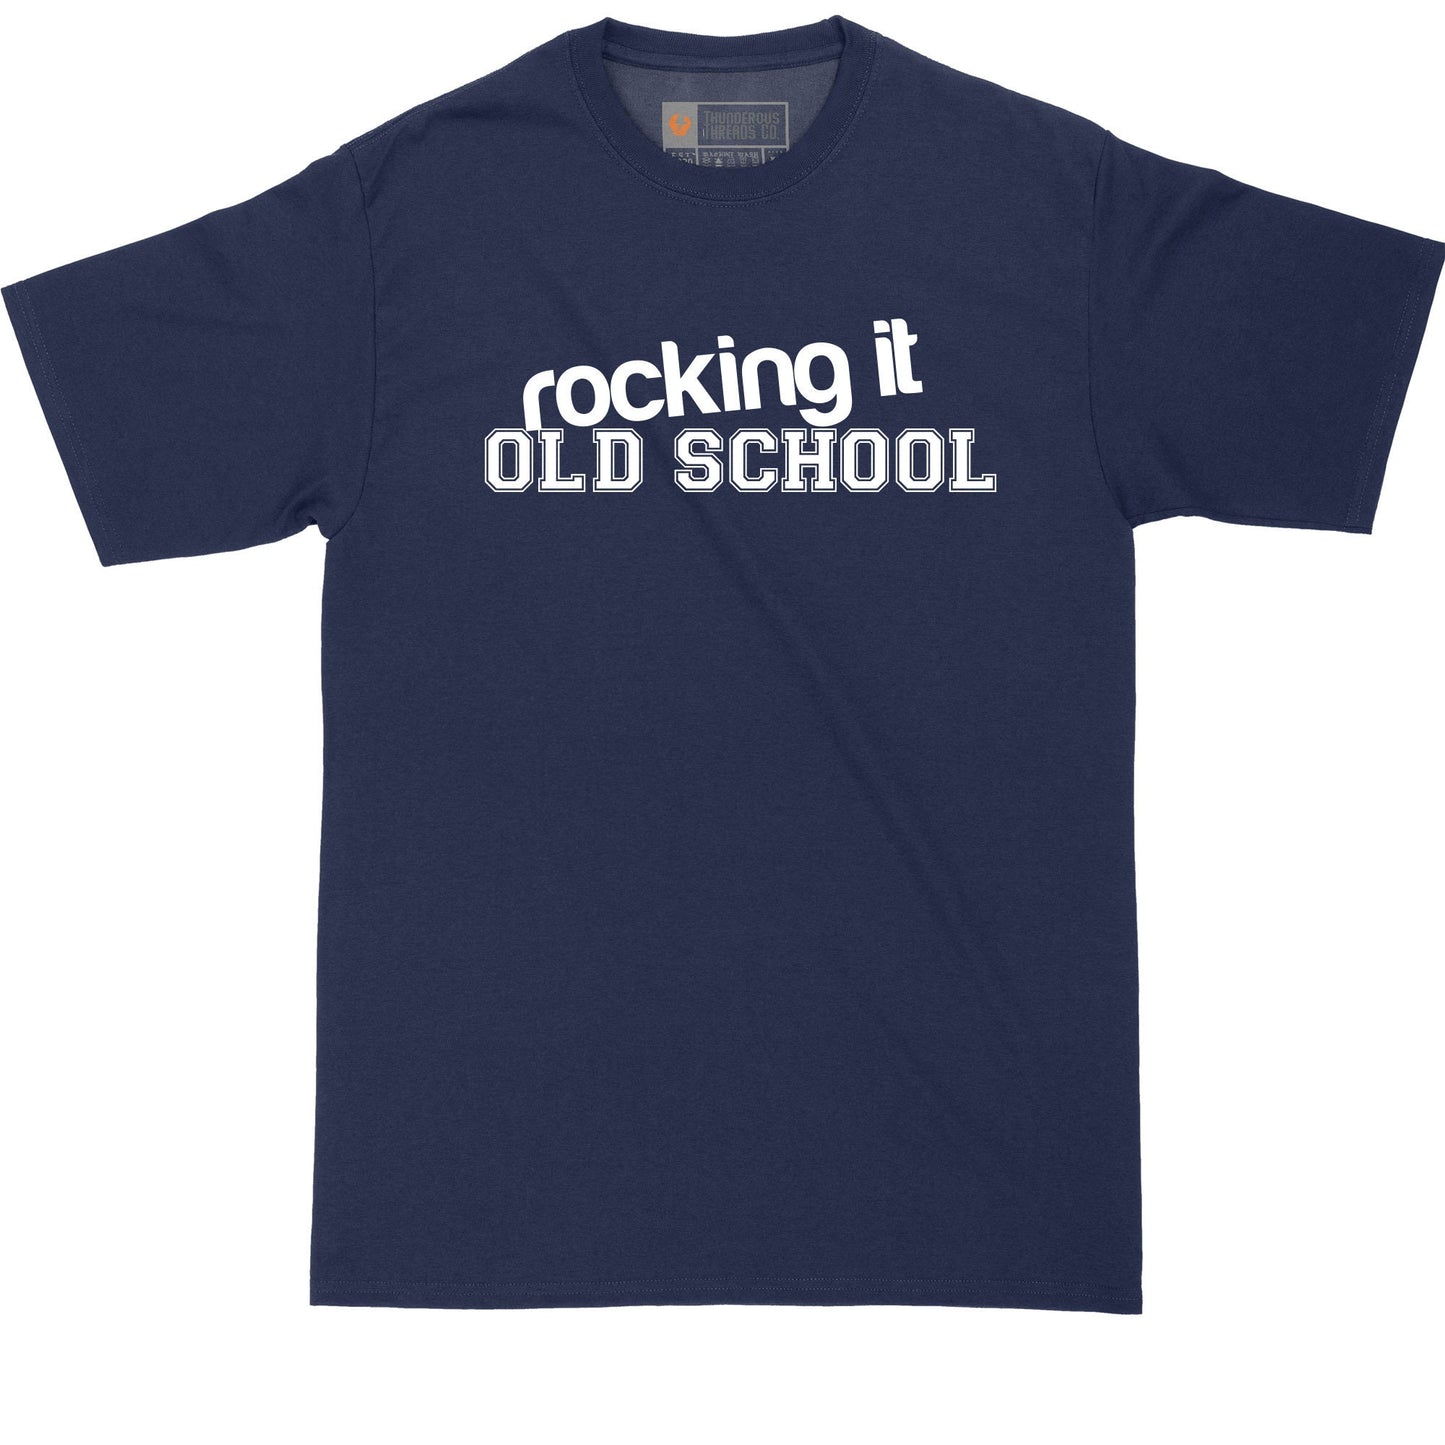 Rocking it Old School | Big and Tall Mens T-Shirt | Funny T-Shirt | Graphic T-Shirt